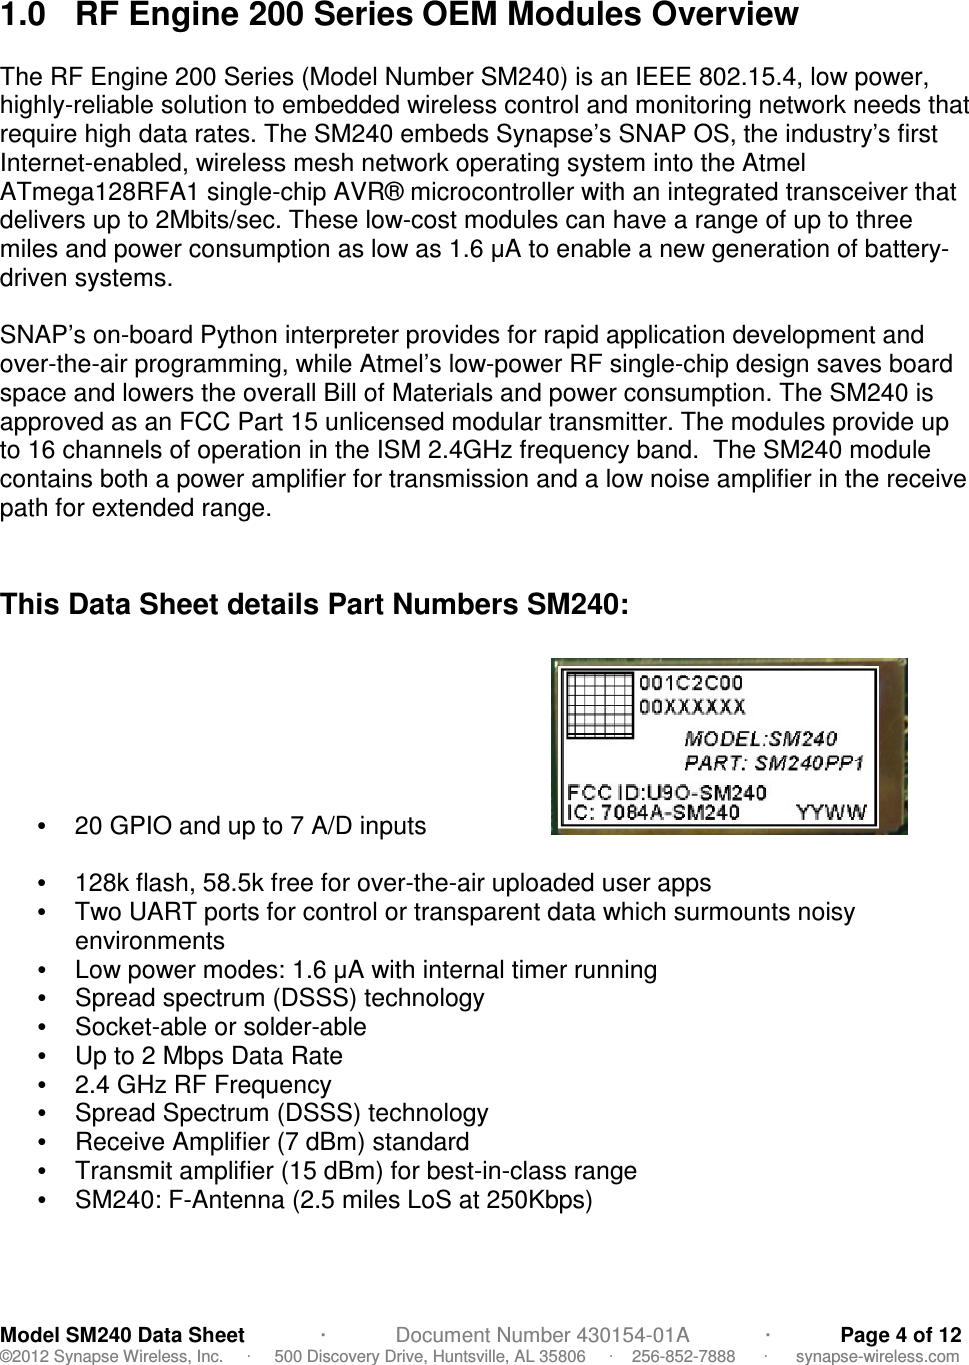                                            Model SM240 Data Sheet             ·            Document Number 430154-01A             ·            Page 4 of 12 ©2012 Synapse Wireless, Inc.     ·     500 Discovery Drive, Huntsville, AL 35806     ·    256-852-7888      ·      synapse-wireless.com  1.0  RF Engine 200 Series OEM Modules Overview  The RF Engine 200 Series (Model Number SM240) is an IEEE 802.15.4, low power, highly-reliable solution to embedded wireless control and monitoring network needs that require high data rates. The SM240 embeds Synapse’s SNAP OS, the industry’s first Internet-enabled, wireless mesh network operating system into the Atmel ATmega128RFA1 single-chip AVR® microcontroller with an integrated transceiver that delivers up to 2Mbits/sec. These low-cost modules can have a range of up to three miles and power consumption as low as 1.6 µA to enable a new generation of battery-driven systems.  SNAP’s on-board Python interpreter provides for rapid application development and over-the-air programming, while Atmel’s low-power RF single-chip design saves board space and lowers the overall Bill of Materials and power consumption. The SM240 is approved as an FCC Part 15 unlicensed modular transmitter. The modules provide up to 16 channels of operation in the ISM 2.4GHz frequency band.  The SM240 module contains both a power amplifier for transmission and a low noise amplifier in the receive path for extended range.   This Data Sheet details Part Numbers SM240:  •  20 GPIO and up to 7 A/D inputs                                                 •  128k flash, 58.5k free for over-the-air uploaded user apps •  Two UART ports for control or transparent data which surmounts noisy environments   •  Low power modes: 1.6 µA with internal timer running •  Spread spectrum (DSSS) technology  •  Socket-able or solder-able •  Up to 2 Mbps Data Rate •  2.4 GHz RF Frequency •  Spread Spectrum (DSSS) technology •  Receive Amplifier (7 dBm) standard •  Transmit amplifier (15 dBm) for best-in-class range •  SM240: F-Antenna (2.5 miles LoS at 250Kbps)  